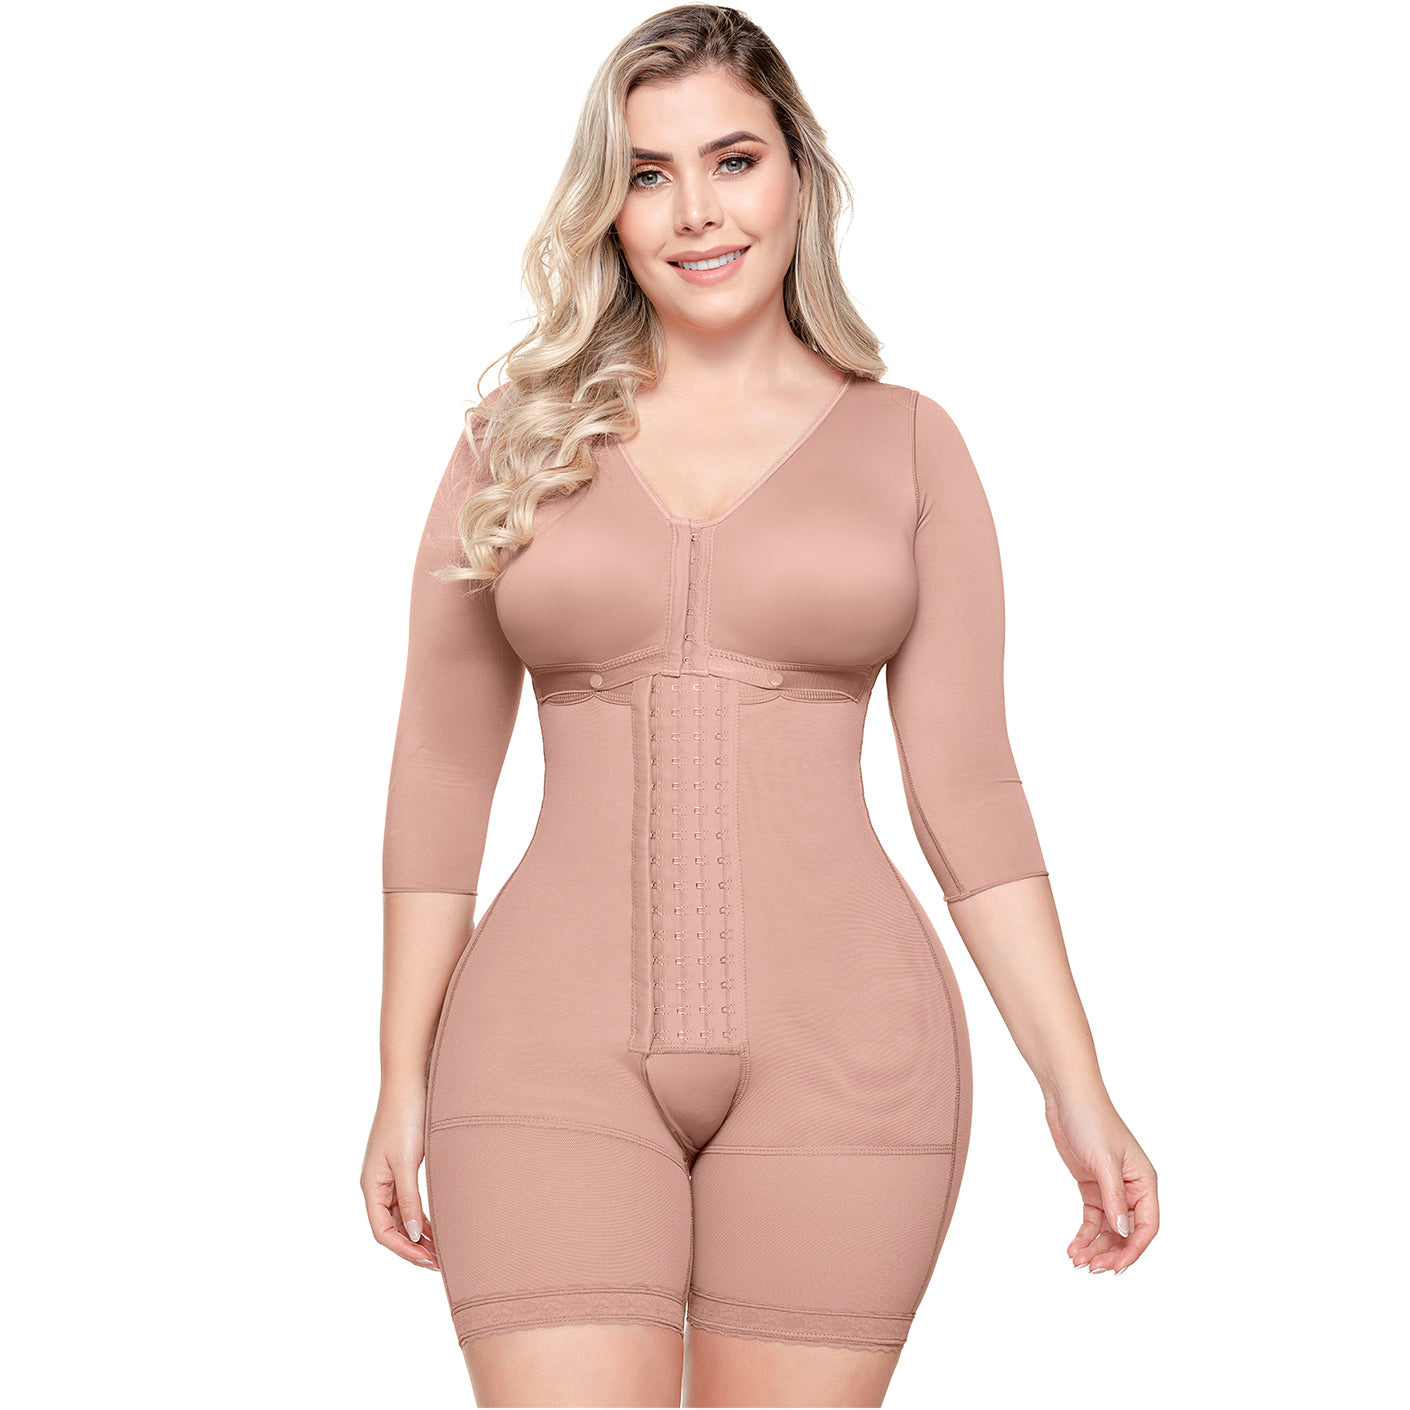 SONRYSE Faja Colombiana Postpartum and Post Surgery Extra Firm Shapewear  Girdle BBL Stage 2 Bodysuit Faja for Woman Chocolate L 